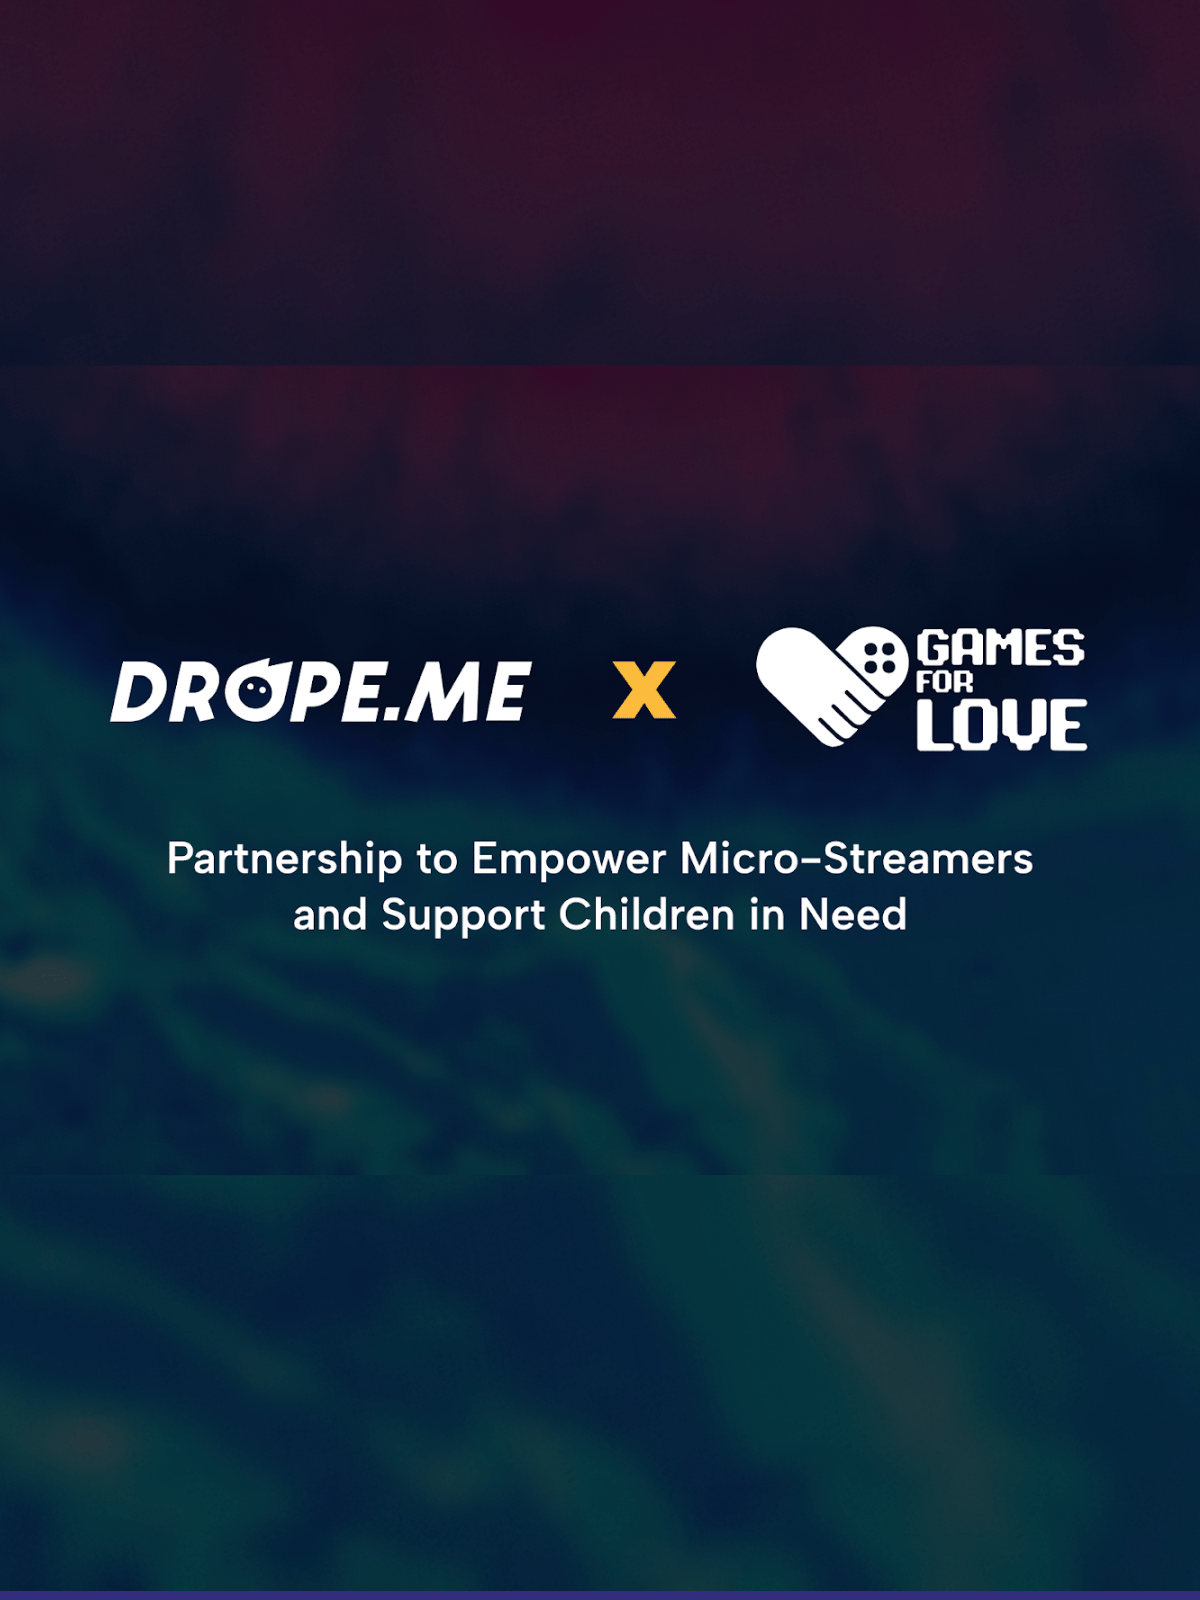 Games For Love and Drope.me Unite to Empower Micro-Streamers and Help Kids